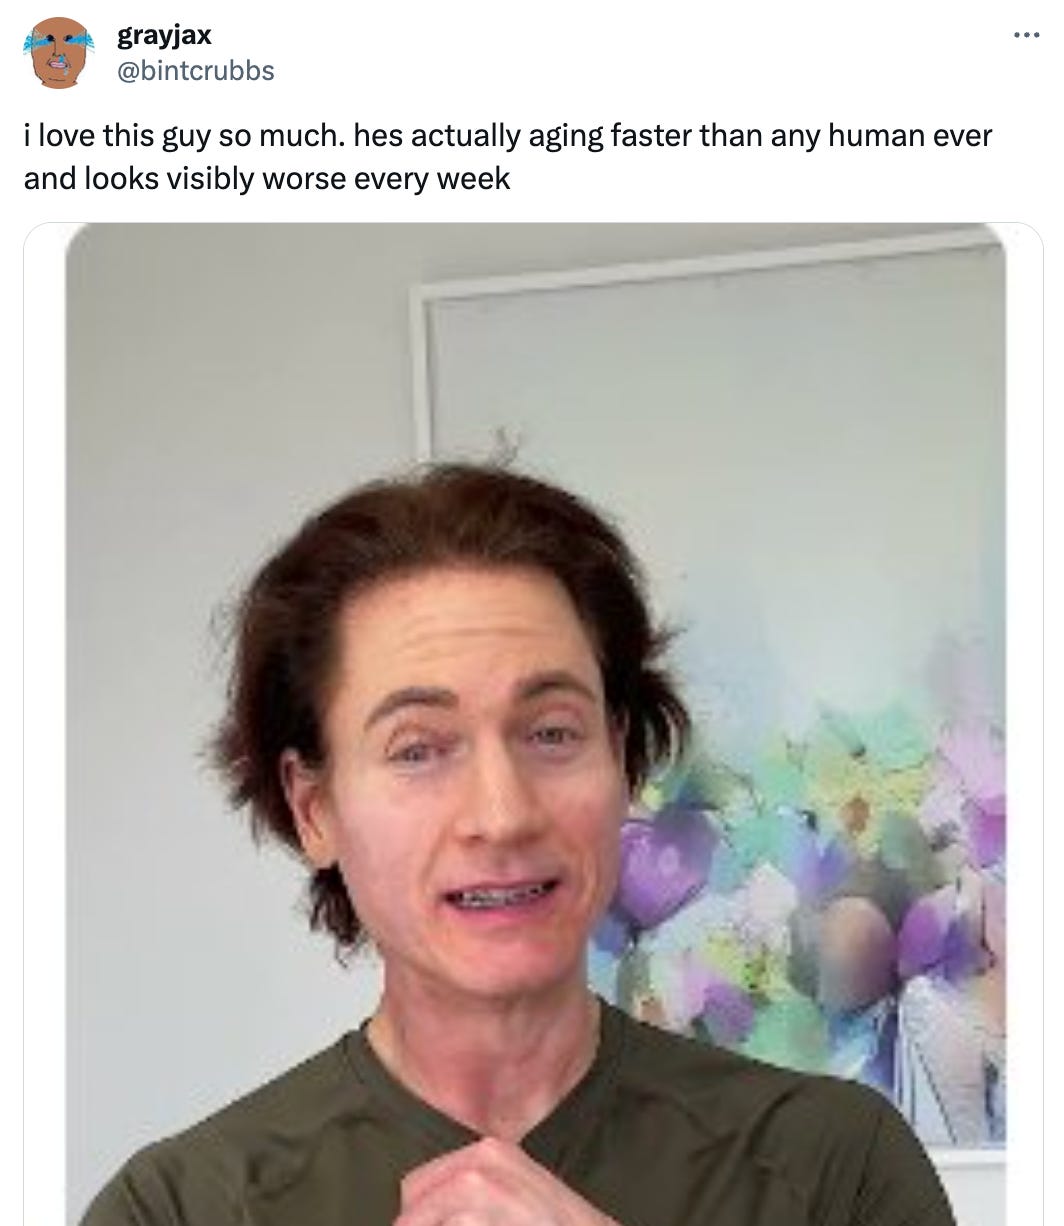 Tweet from @bintcrubbs that reads "i love this guy so much. hes actually aging faster than any human ever and looks visibly worse every week" and features a very rough looking photo of Bryan Johnson